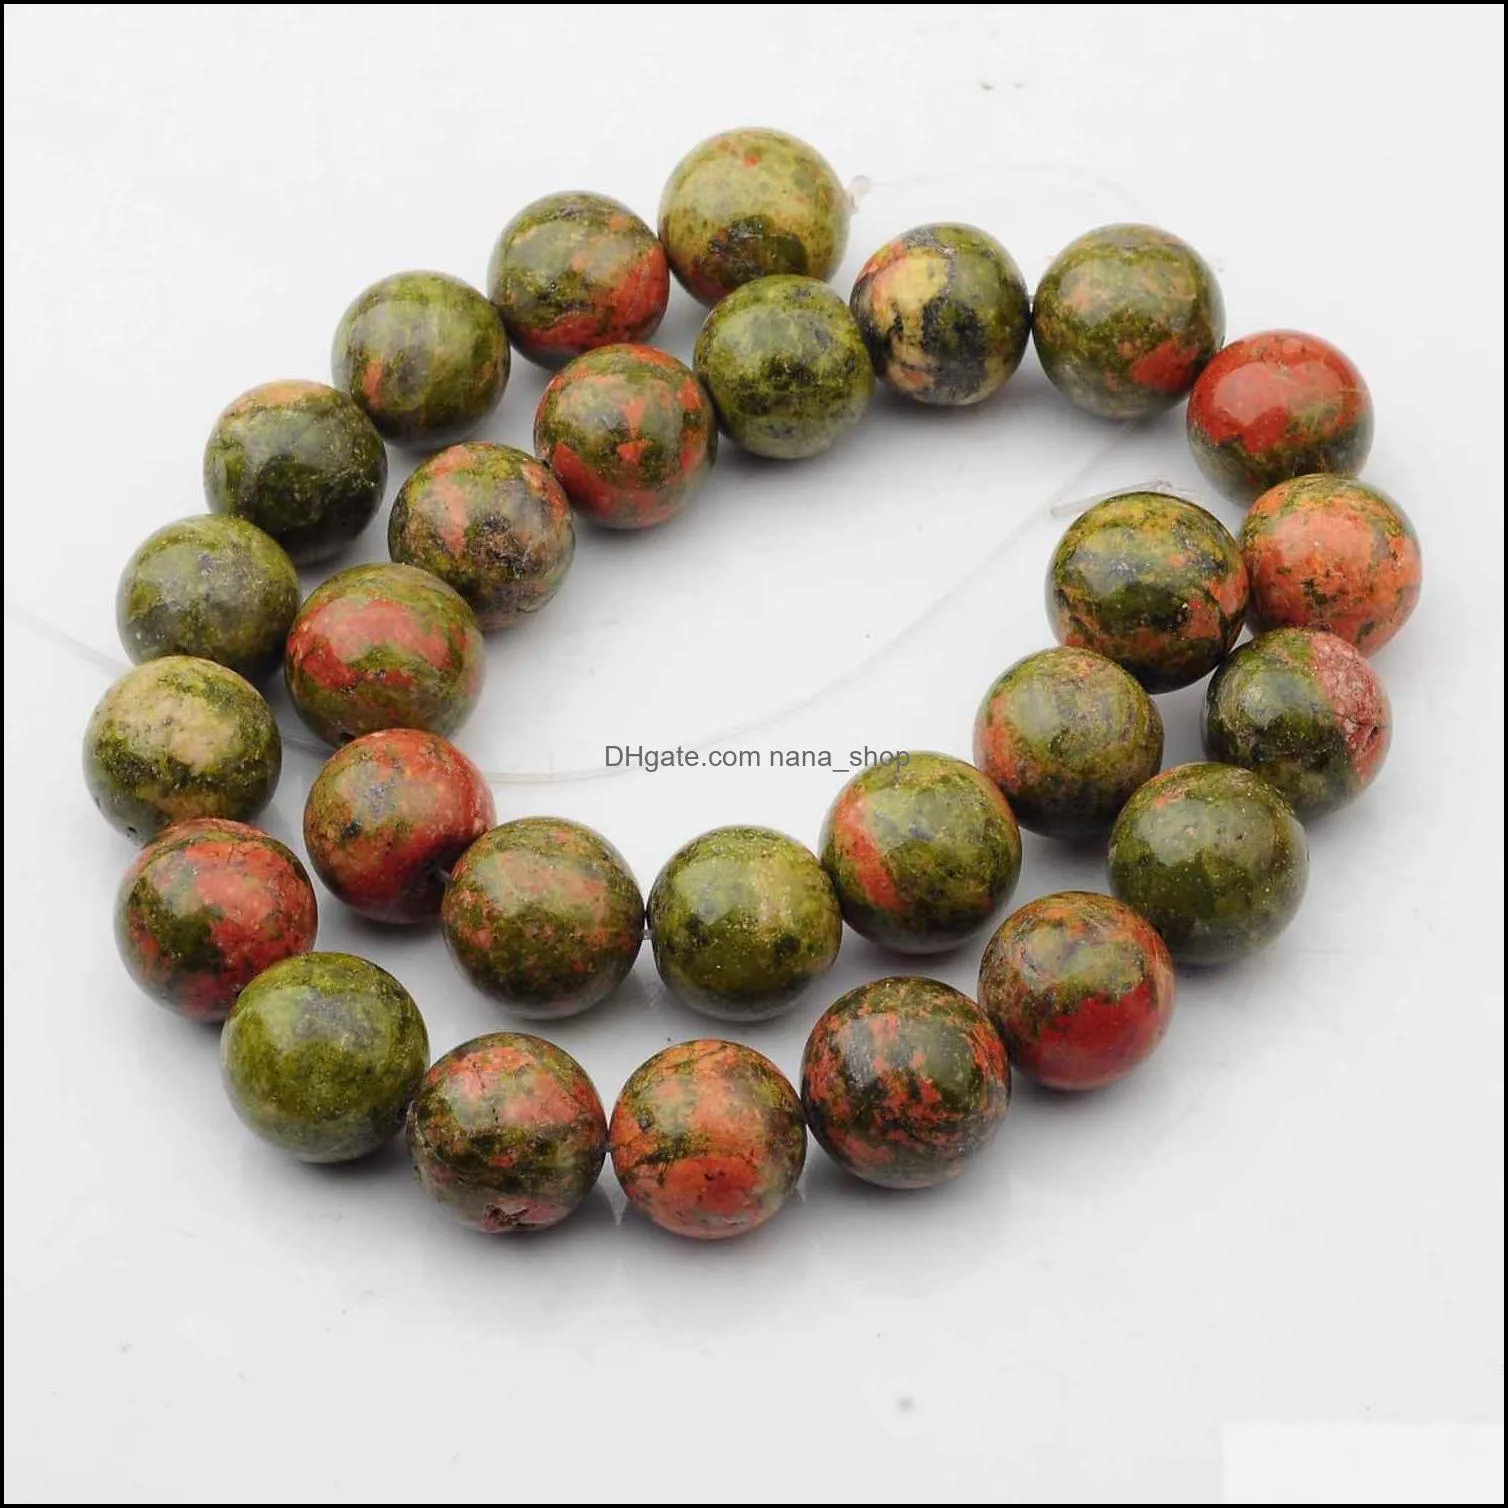 natural gemstone unakite 14mm round beads for diy making charm jewelry necklace bracelet loose 28pcs stone beads for wholesales